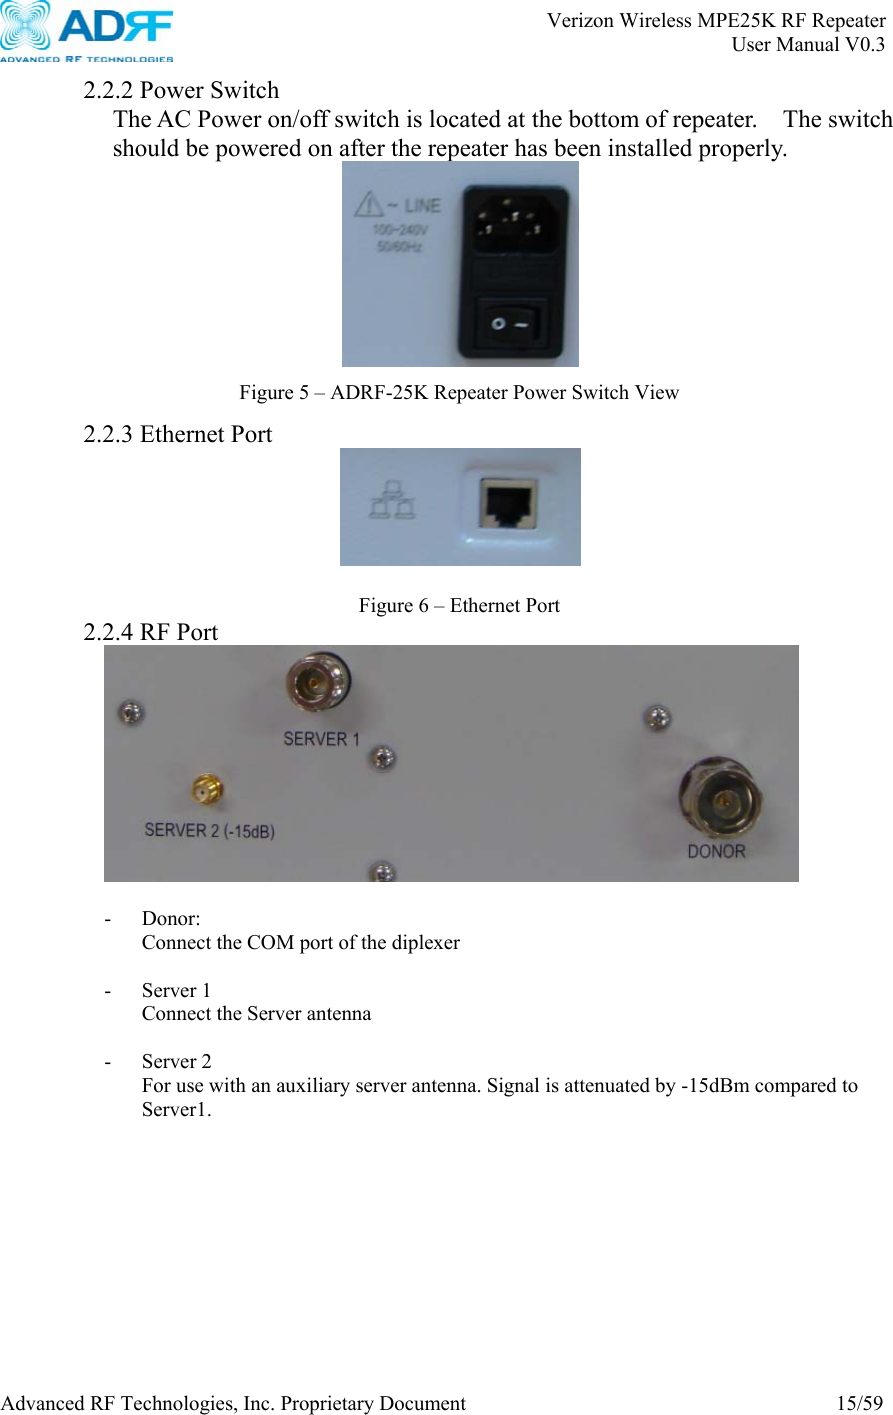       Verizon Wireless MPE25K RF Repeater   User Manual V0.3 Advanced RF Technologies, Inc. Proprietary Document  15/59  2.2.2 Power Switch The AC Power on/off switch is located at the bottom of repeater.    The switch should be powered on after the repeater has been installed properly.     2.2.3 Ethernet Port     2.2.4 RF Port   - Donor: Connect the COM port of the diplexer  - Server 1 Connect the Server antenna  - Server 2 For use with an auxiliary server antenna. Signal is attenuated by -15dBm compared to Server1.   Figure 5 – ADRF-25K Repeater Power Switch View Figure 6 – Ethernet Port 